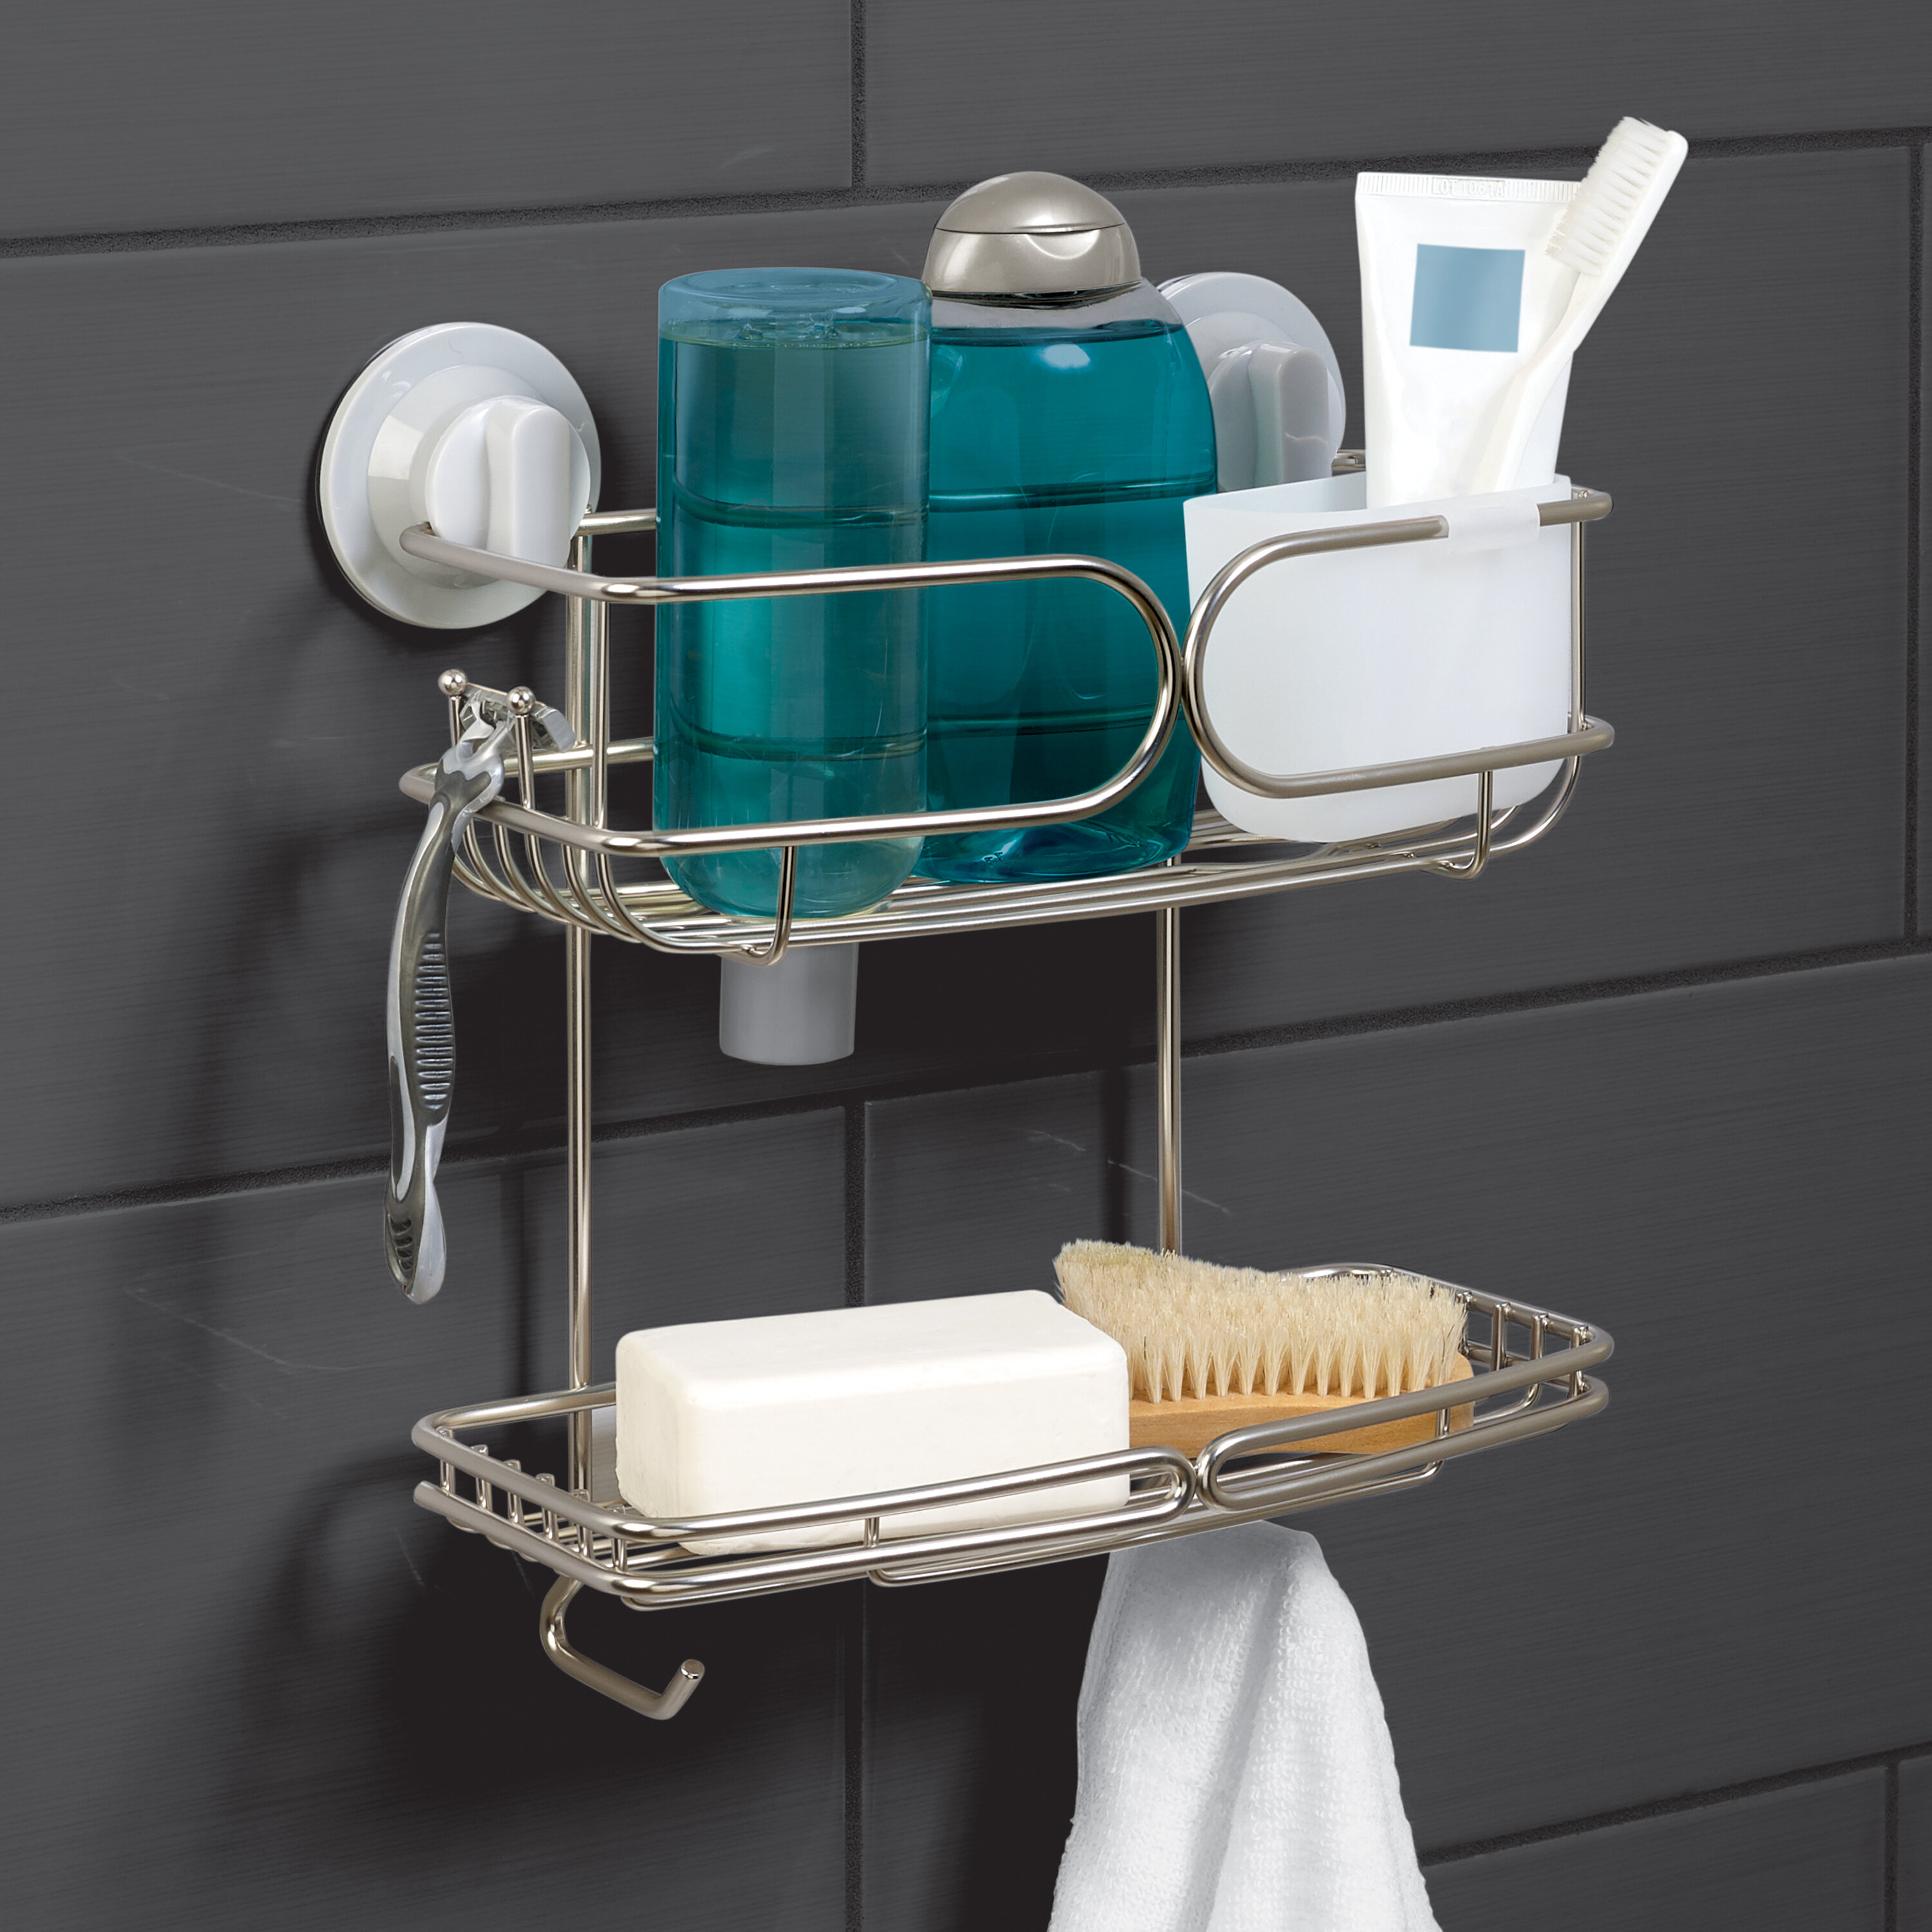 Zenna Home Suction Stainless Steel Shower Caddy & Reviews